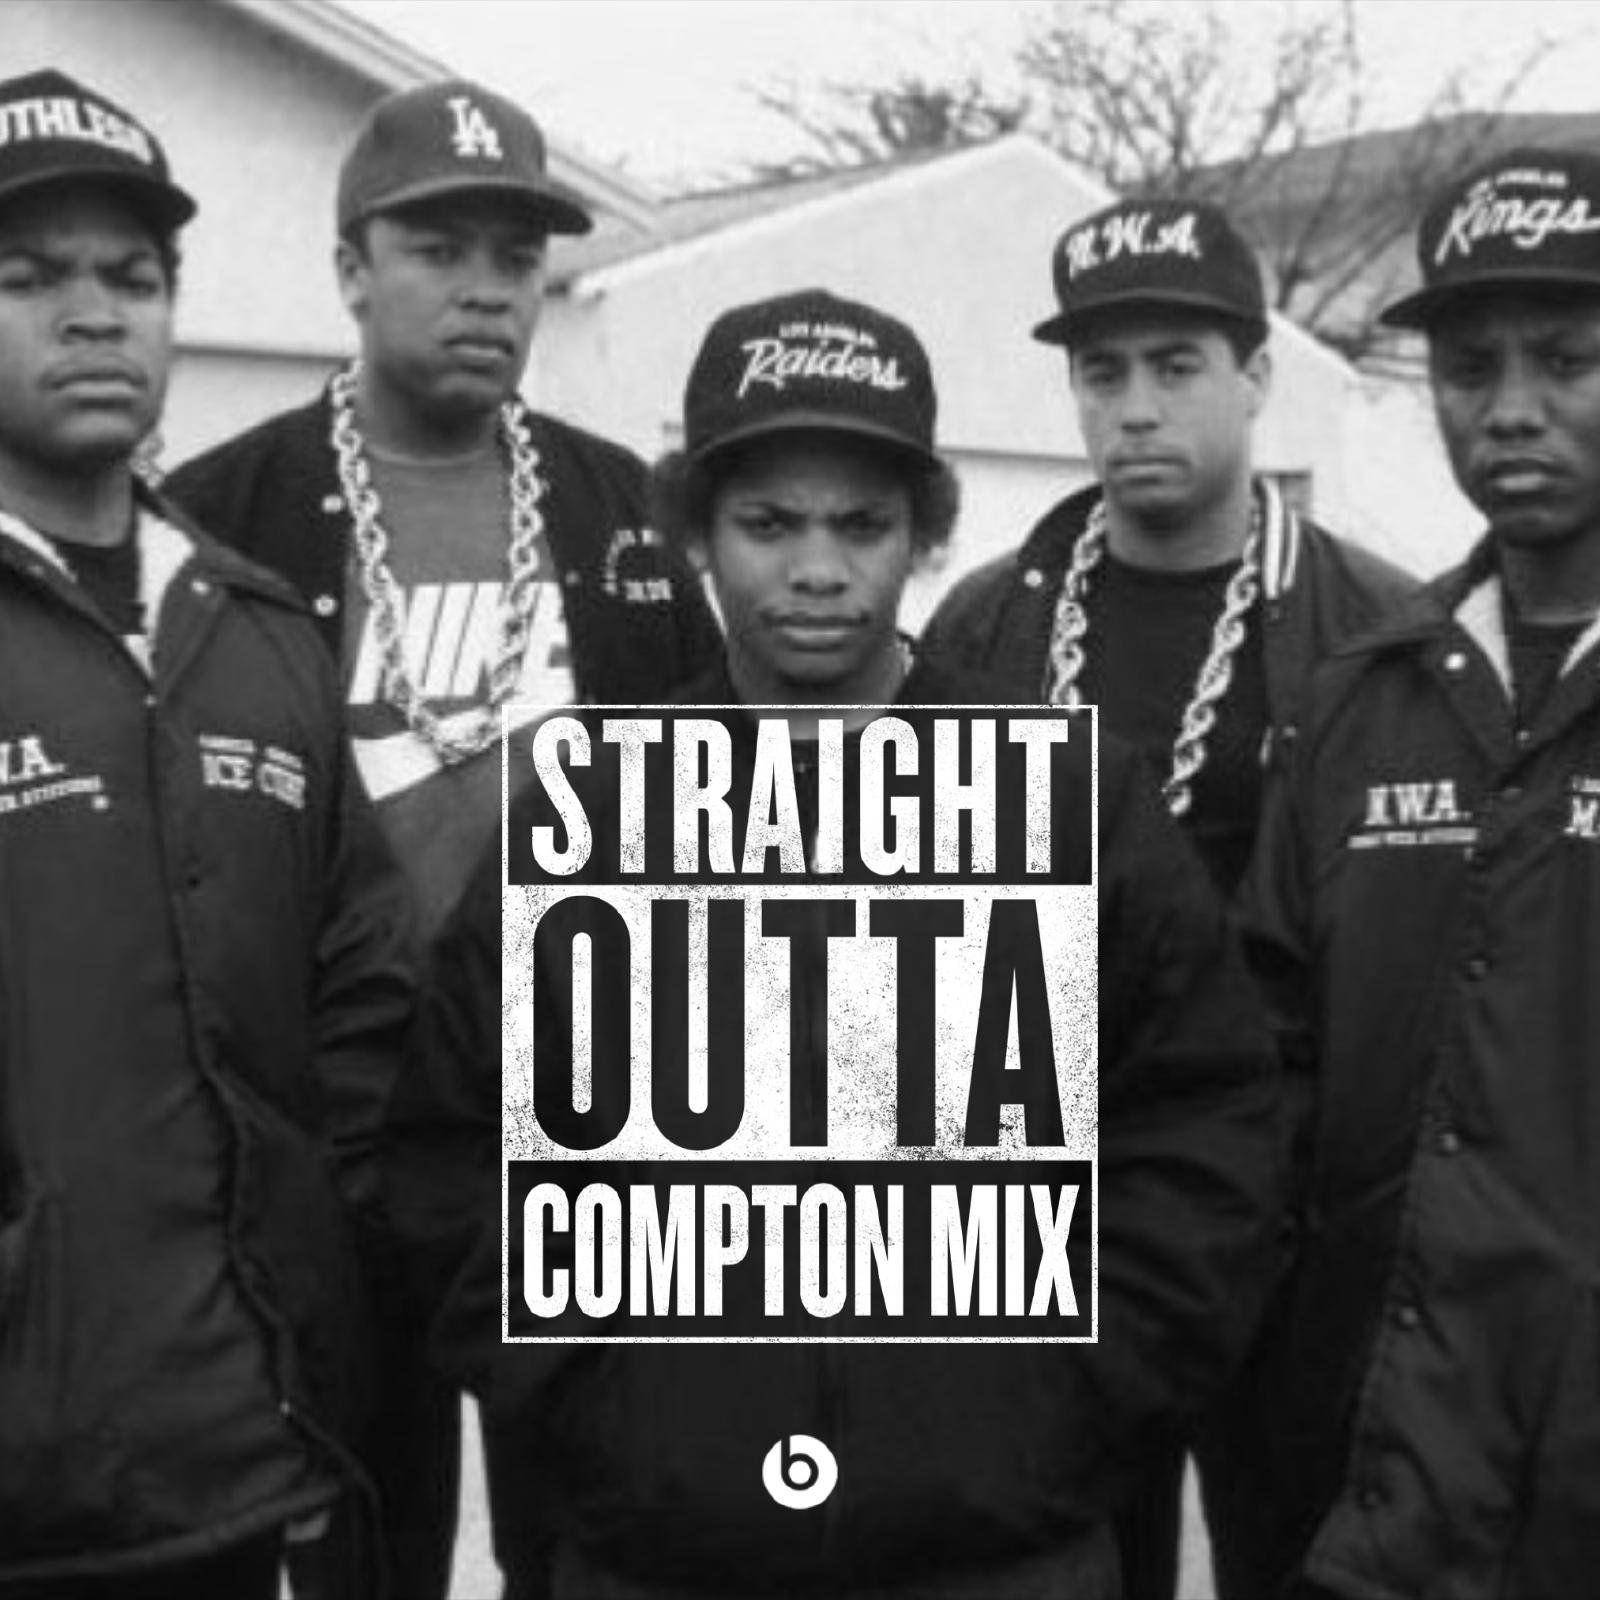 N.W.A. Straight Outta Compton Mix Poster Wallpaper